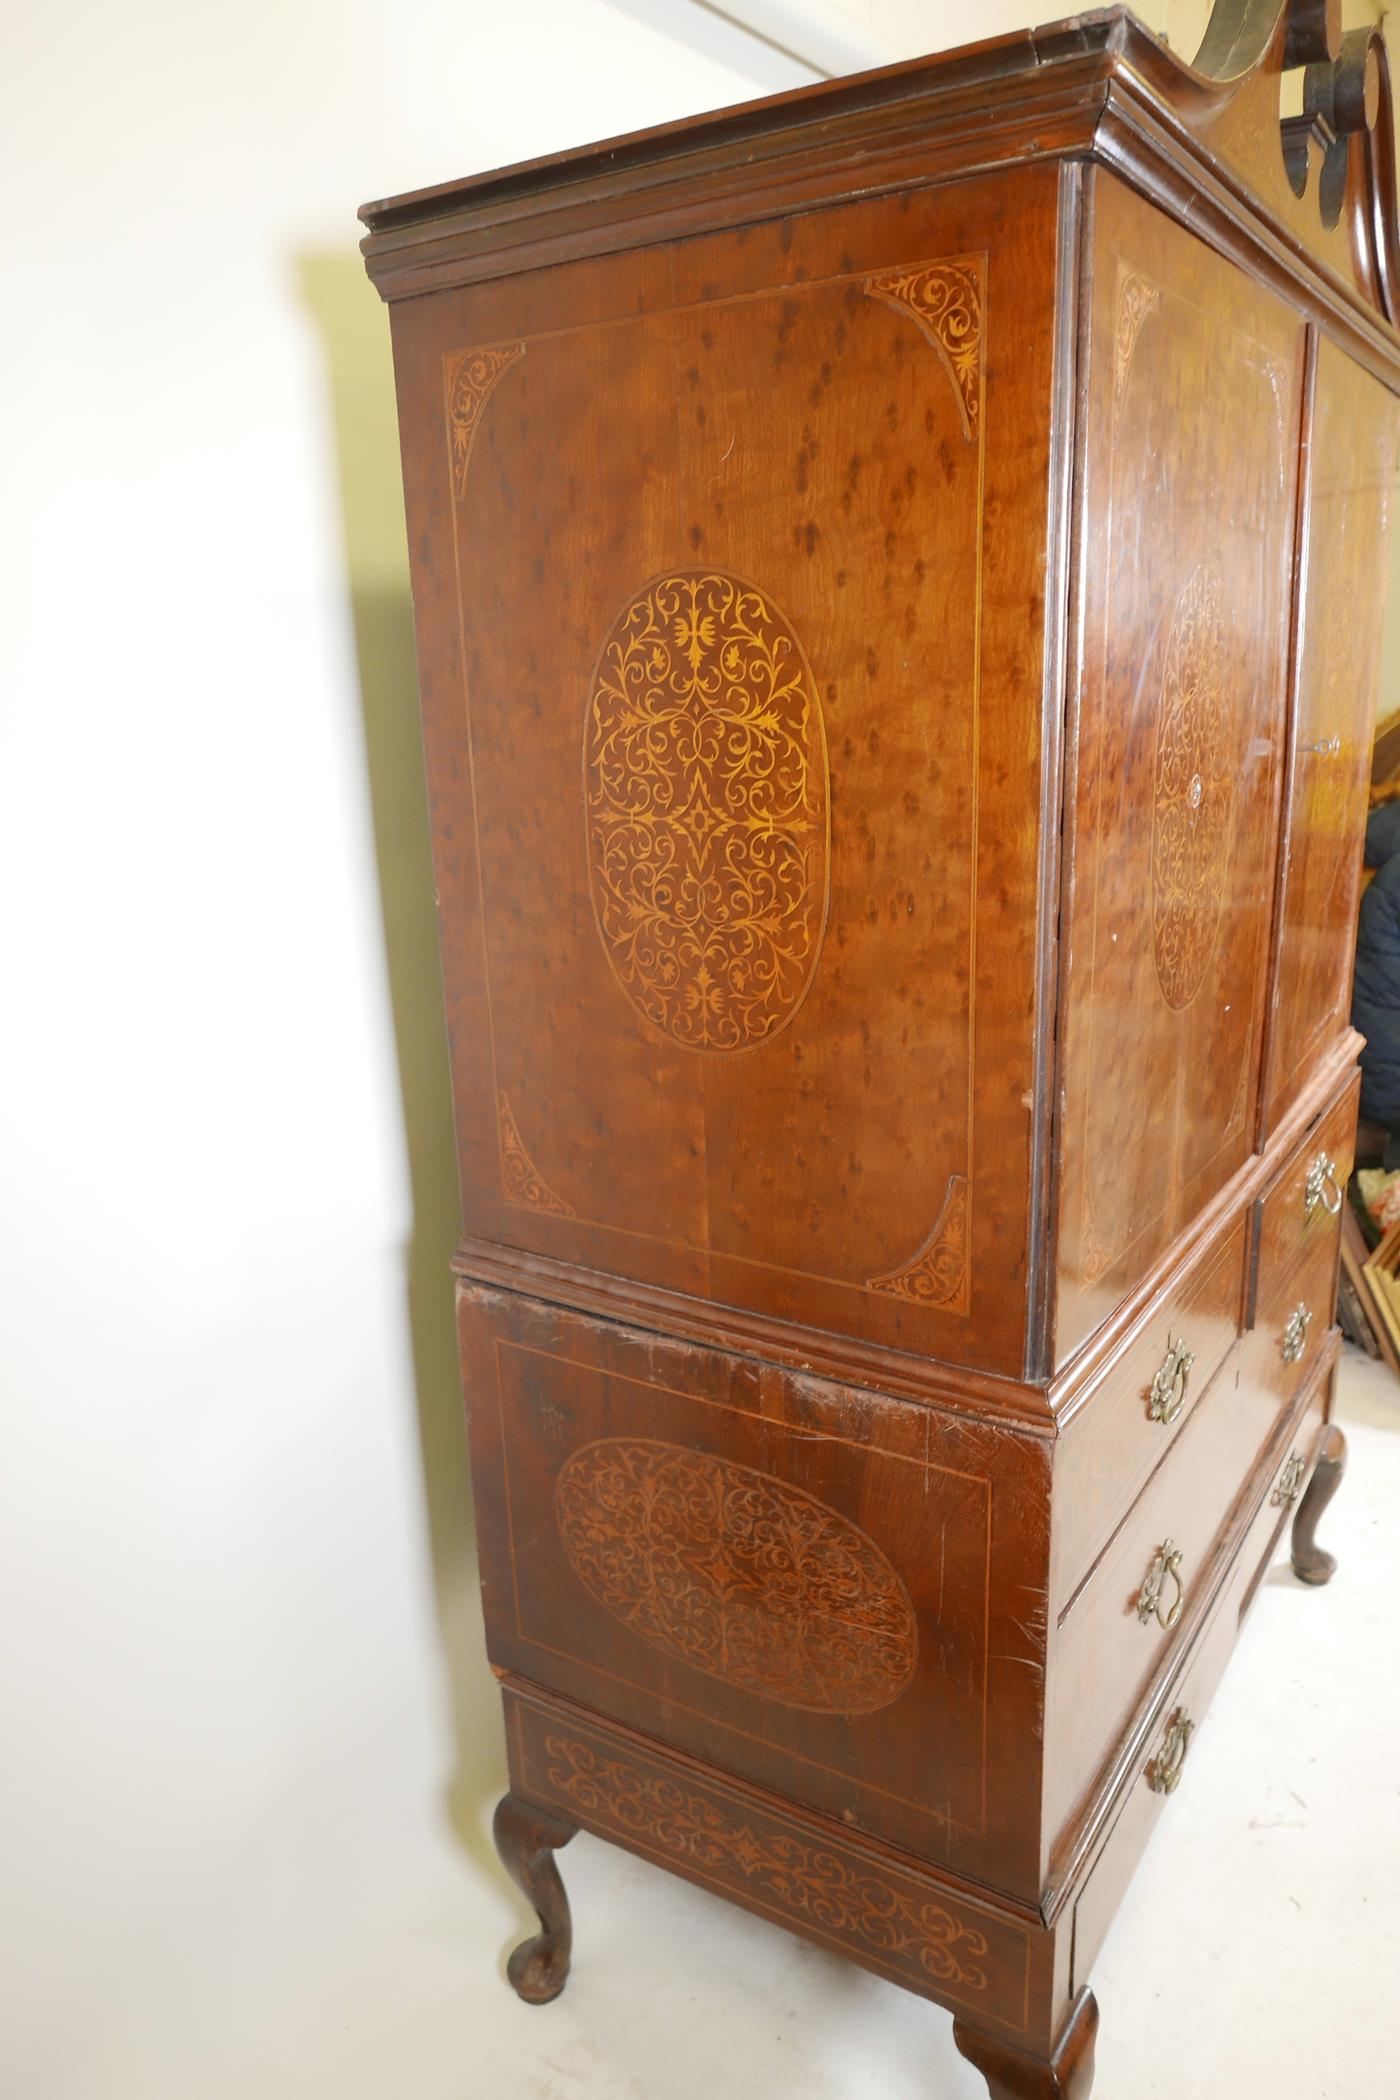 A C19th plum pudding mahogany press cupboard, with inlaid seaweed panel panels, the upper section - Image 2 of 5